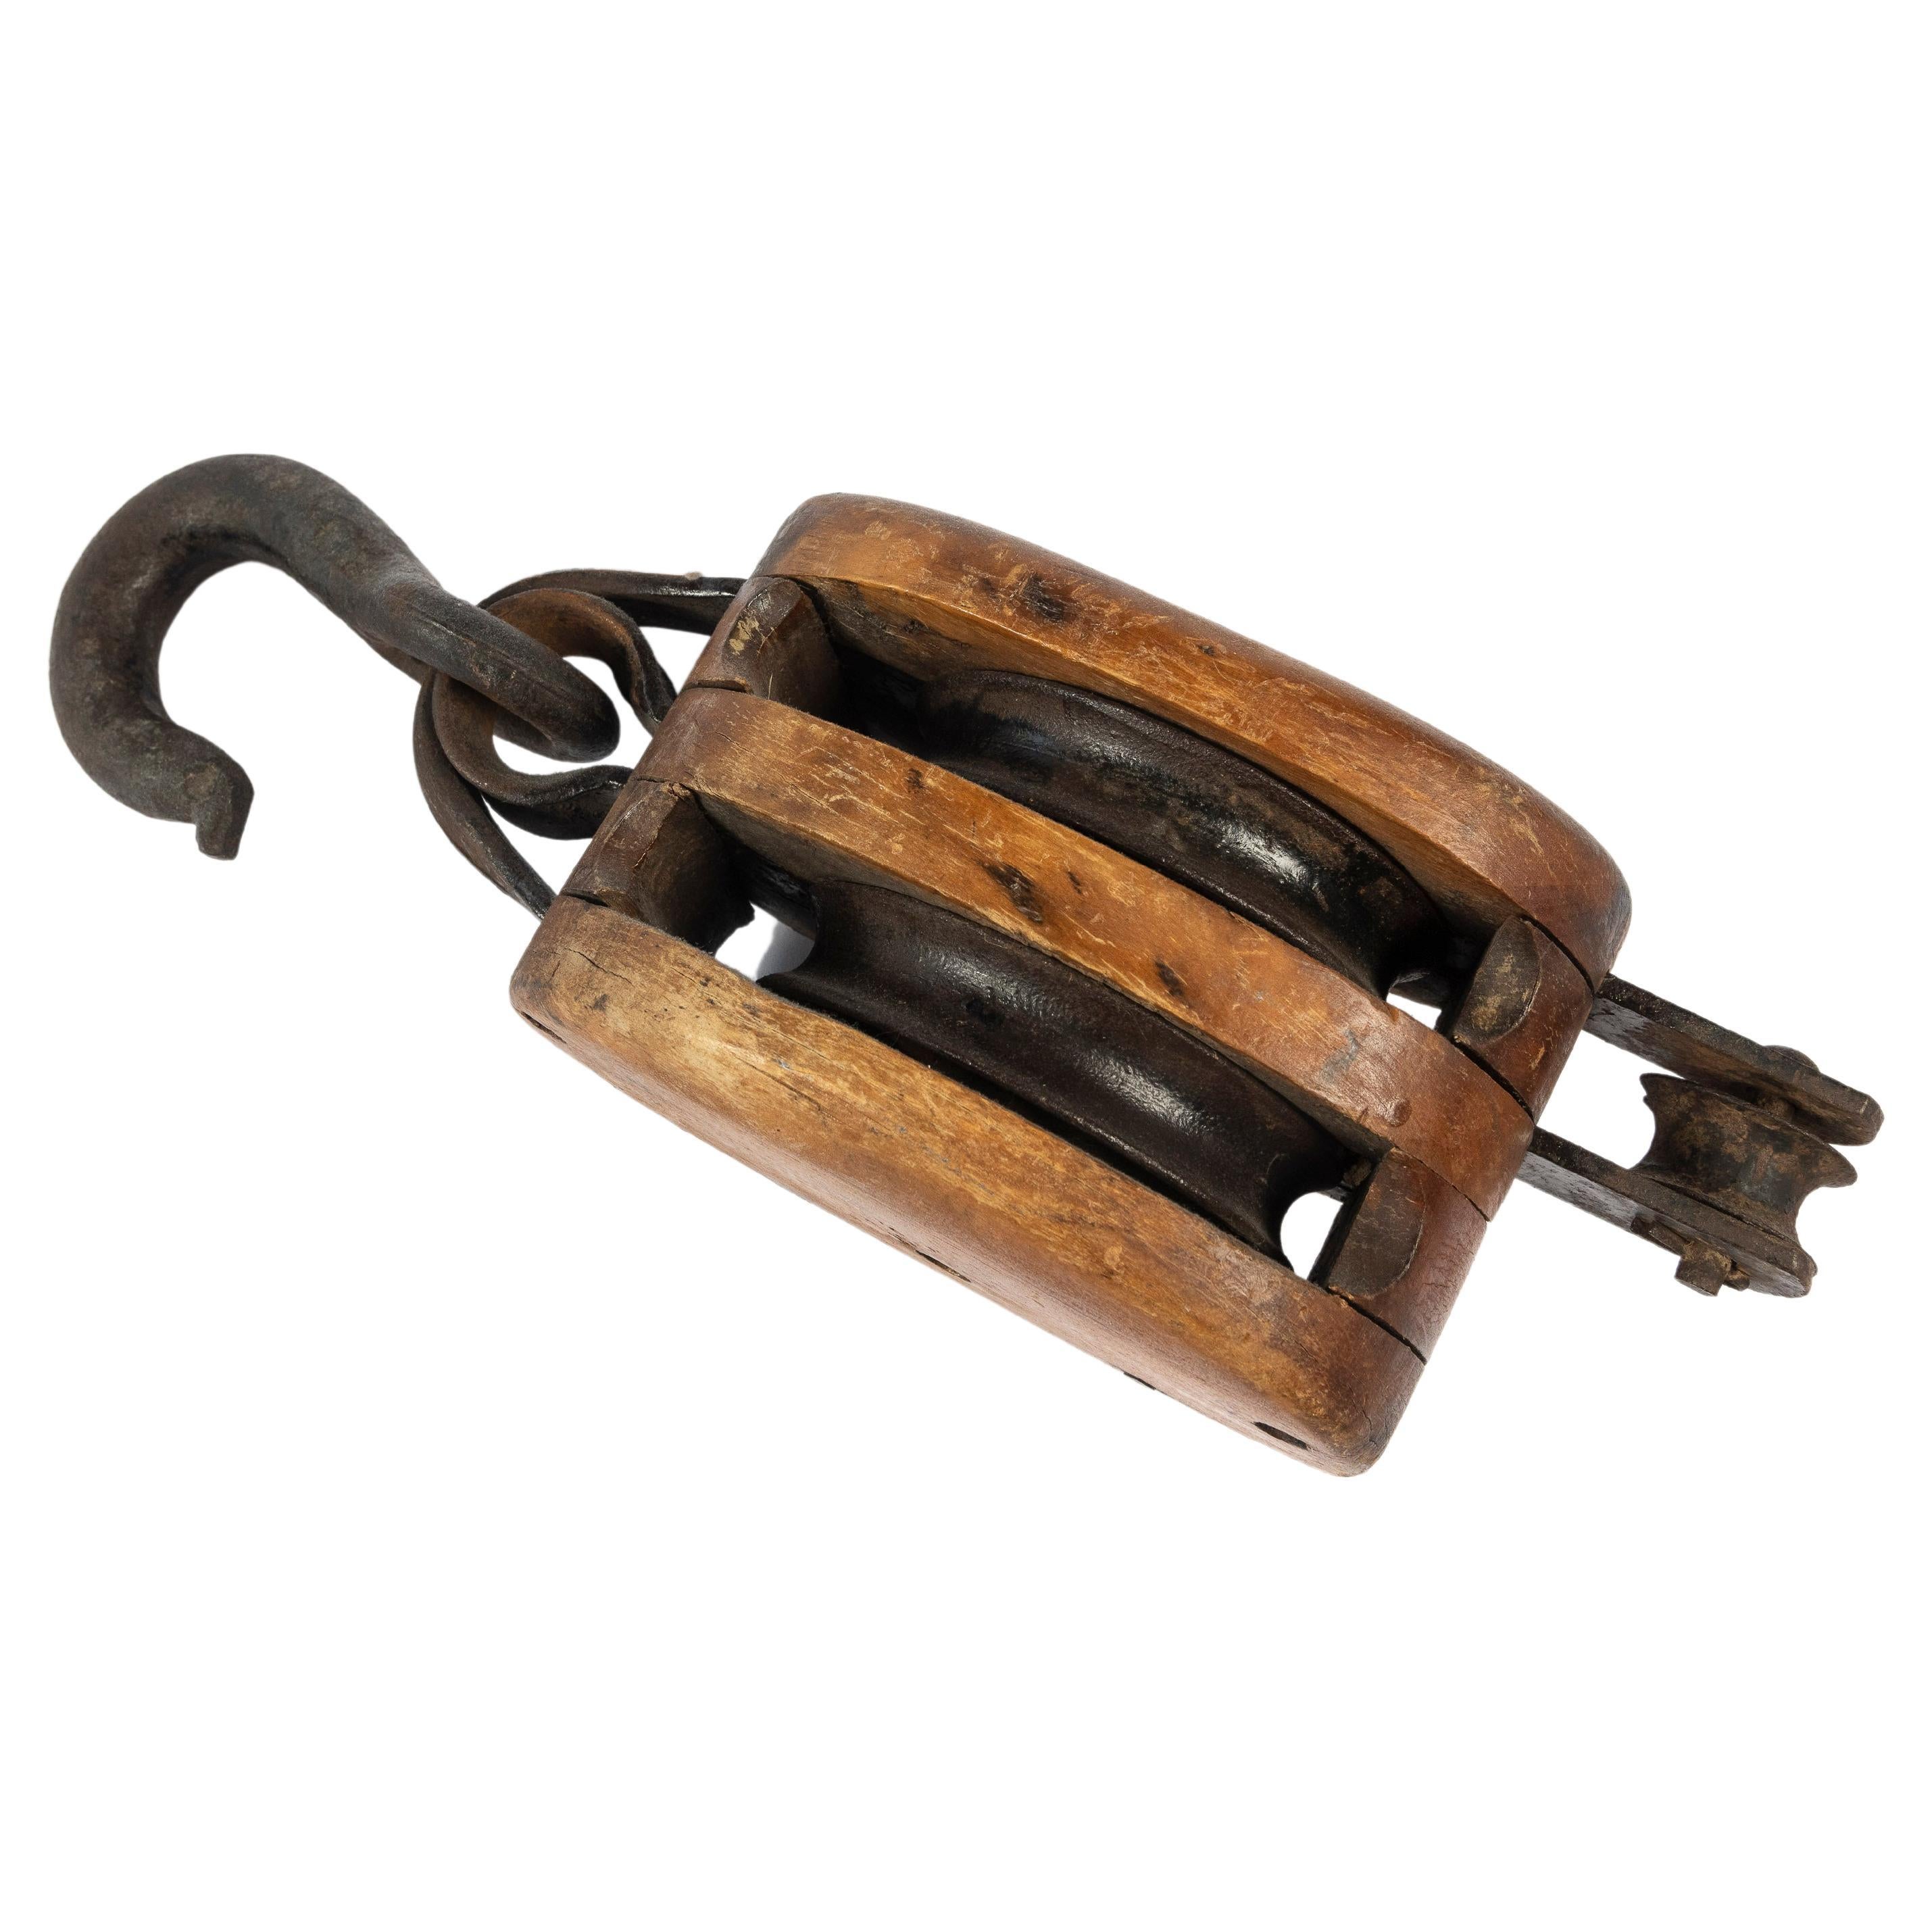 Vintage Double Block and Tackle Pulley Hook